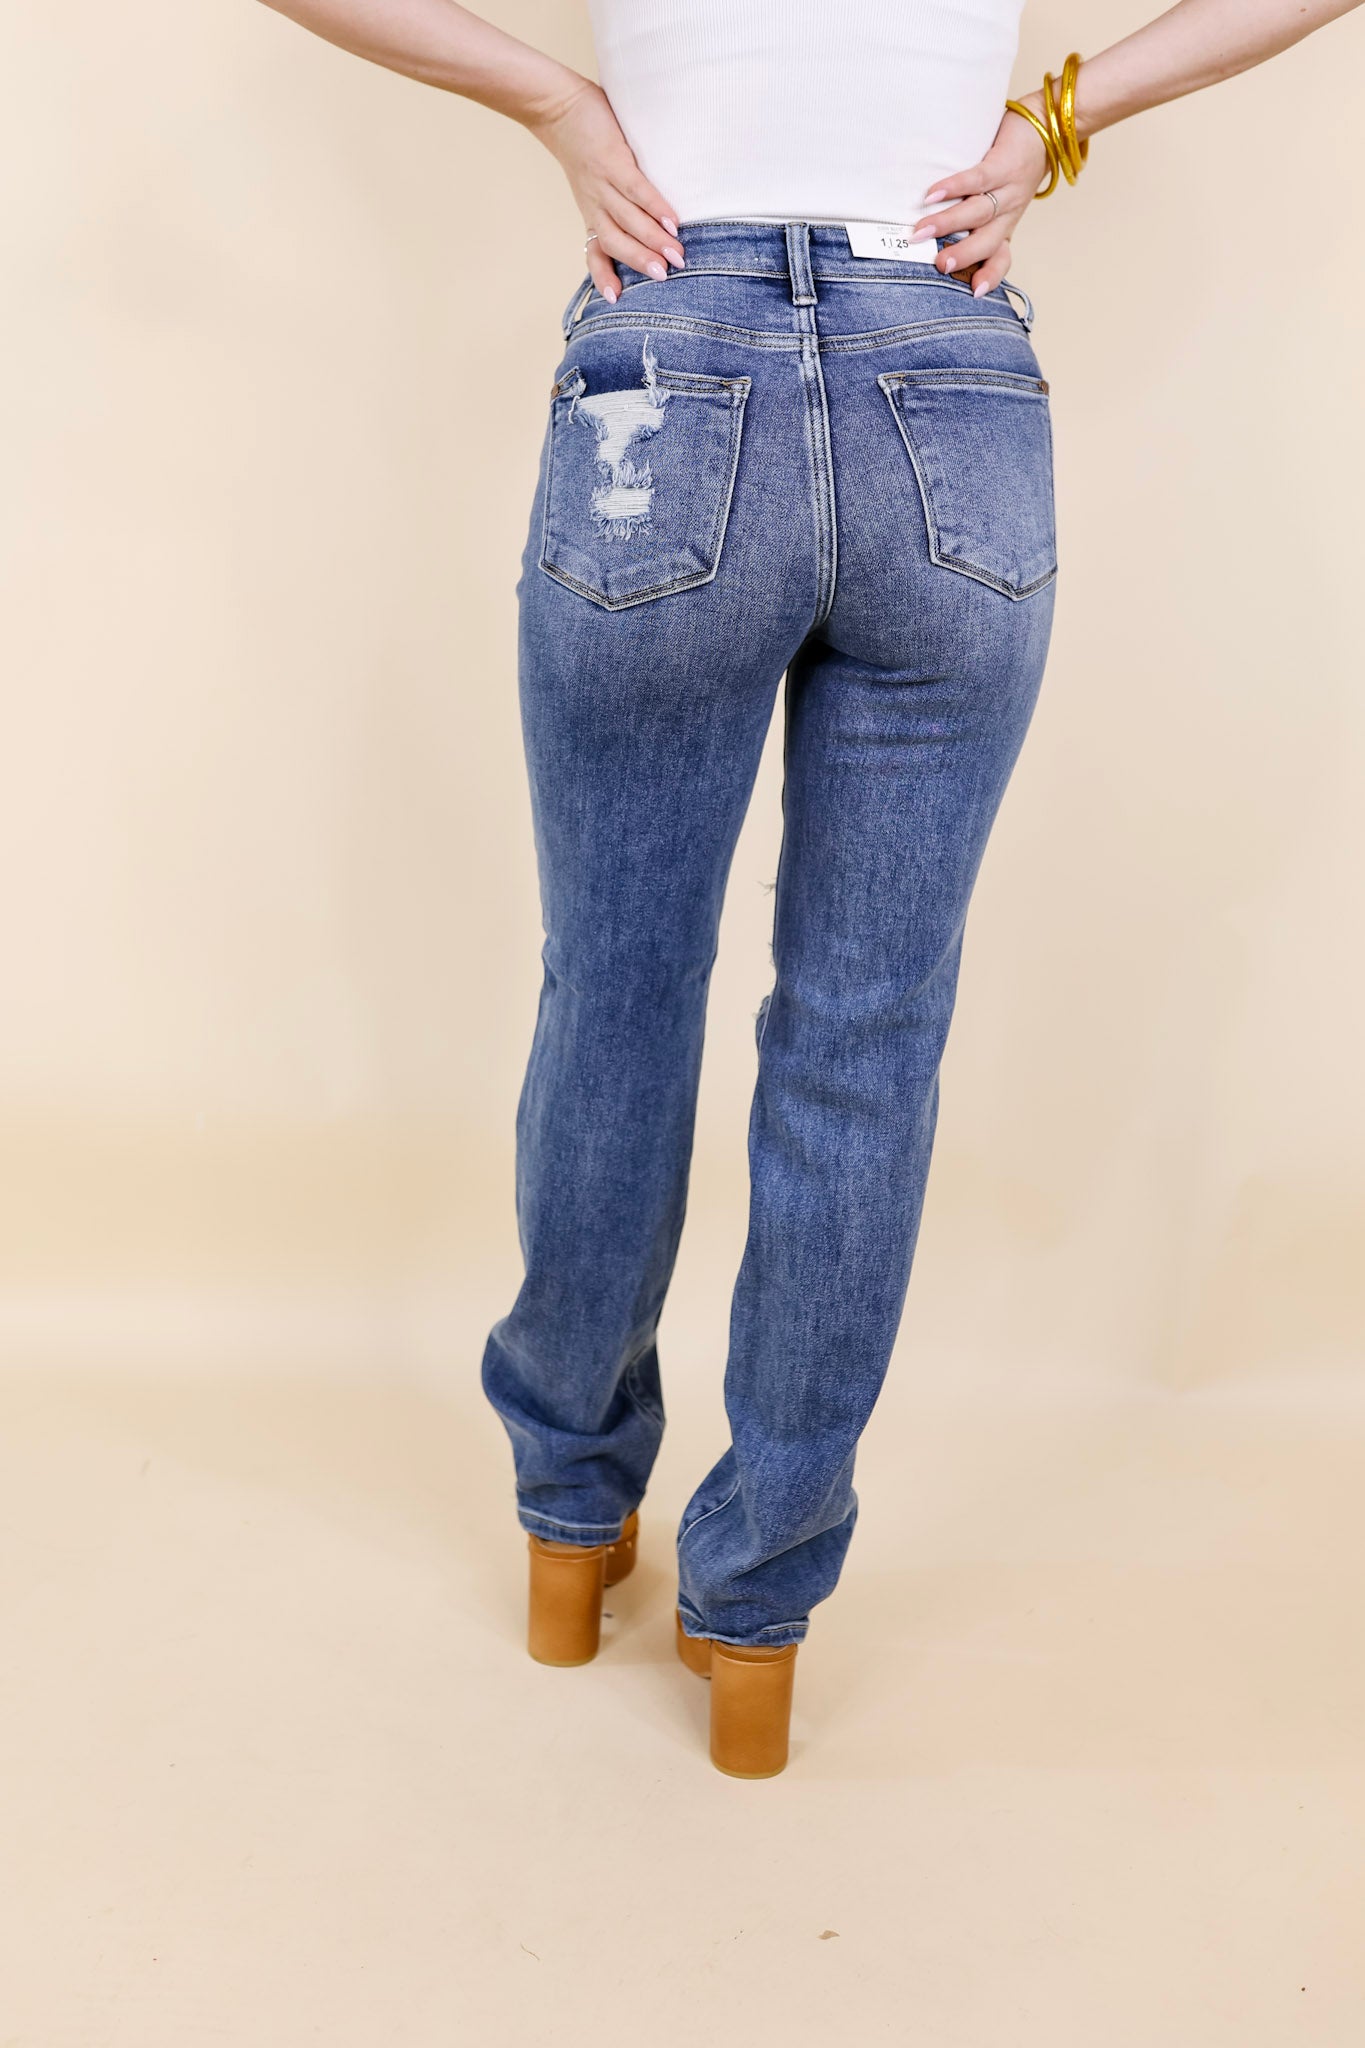 Judy Blue | Making Mischief Distressed Straight Leg Jeans in Medium Wash - Giddy Up Glamour Boutique